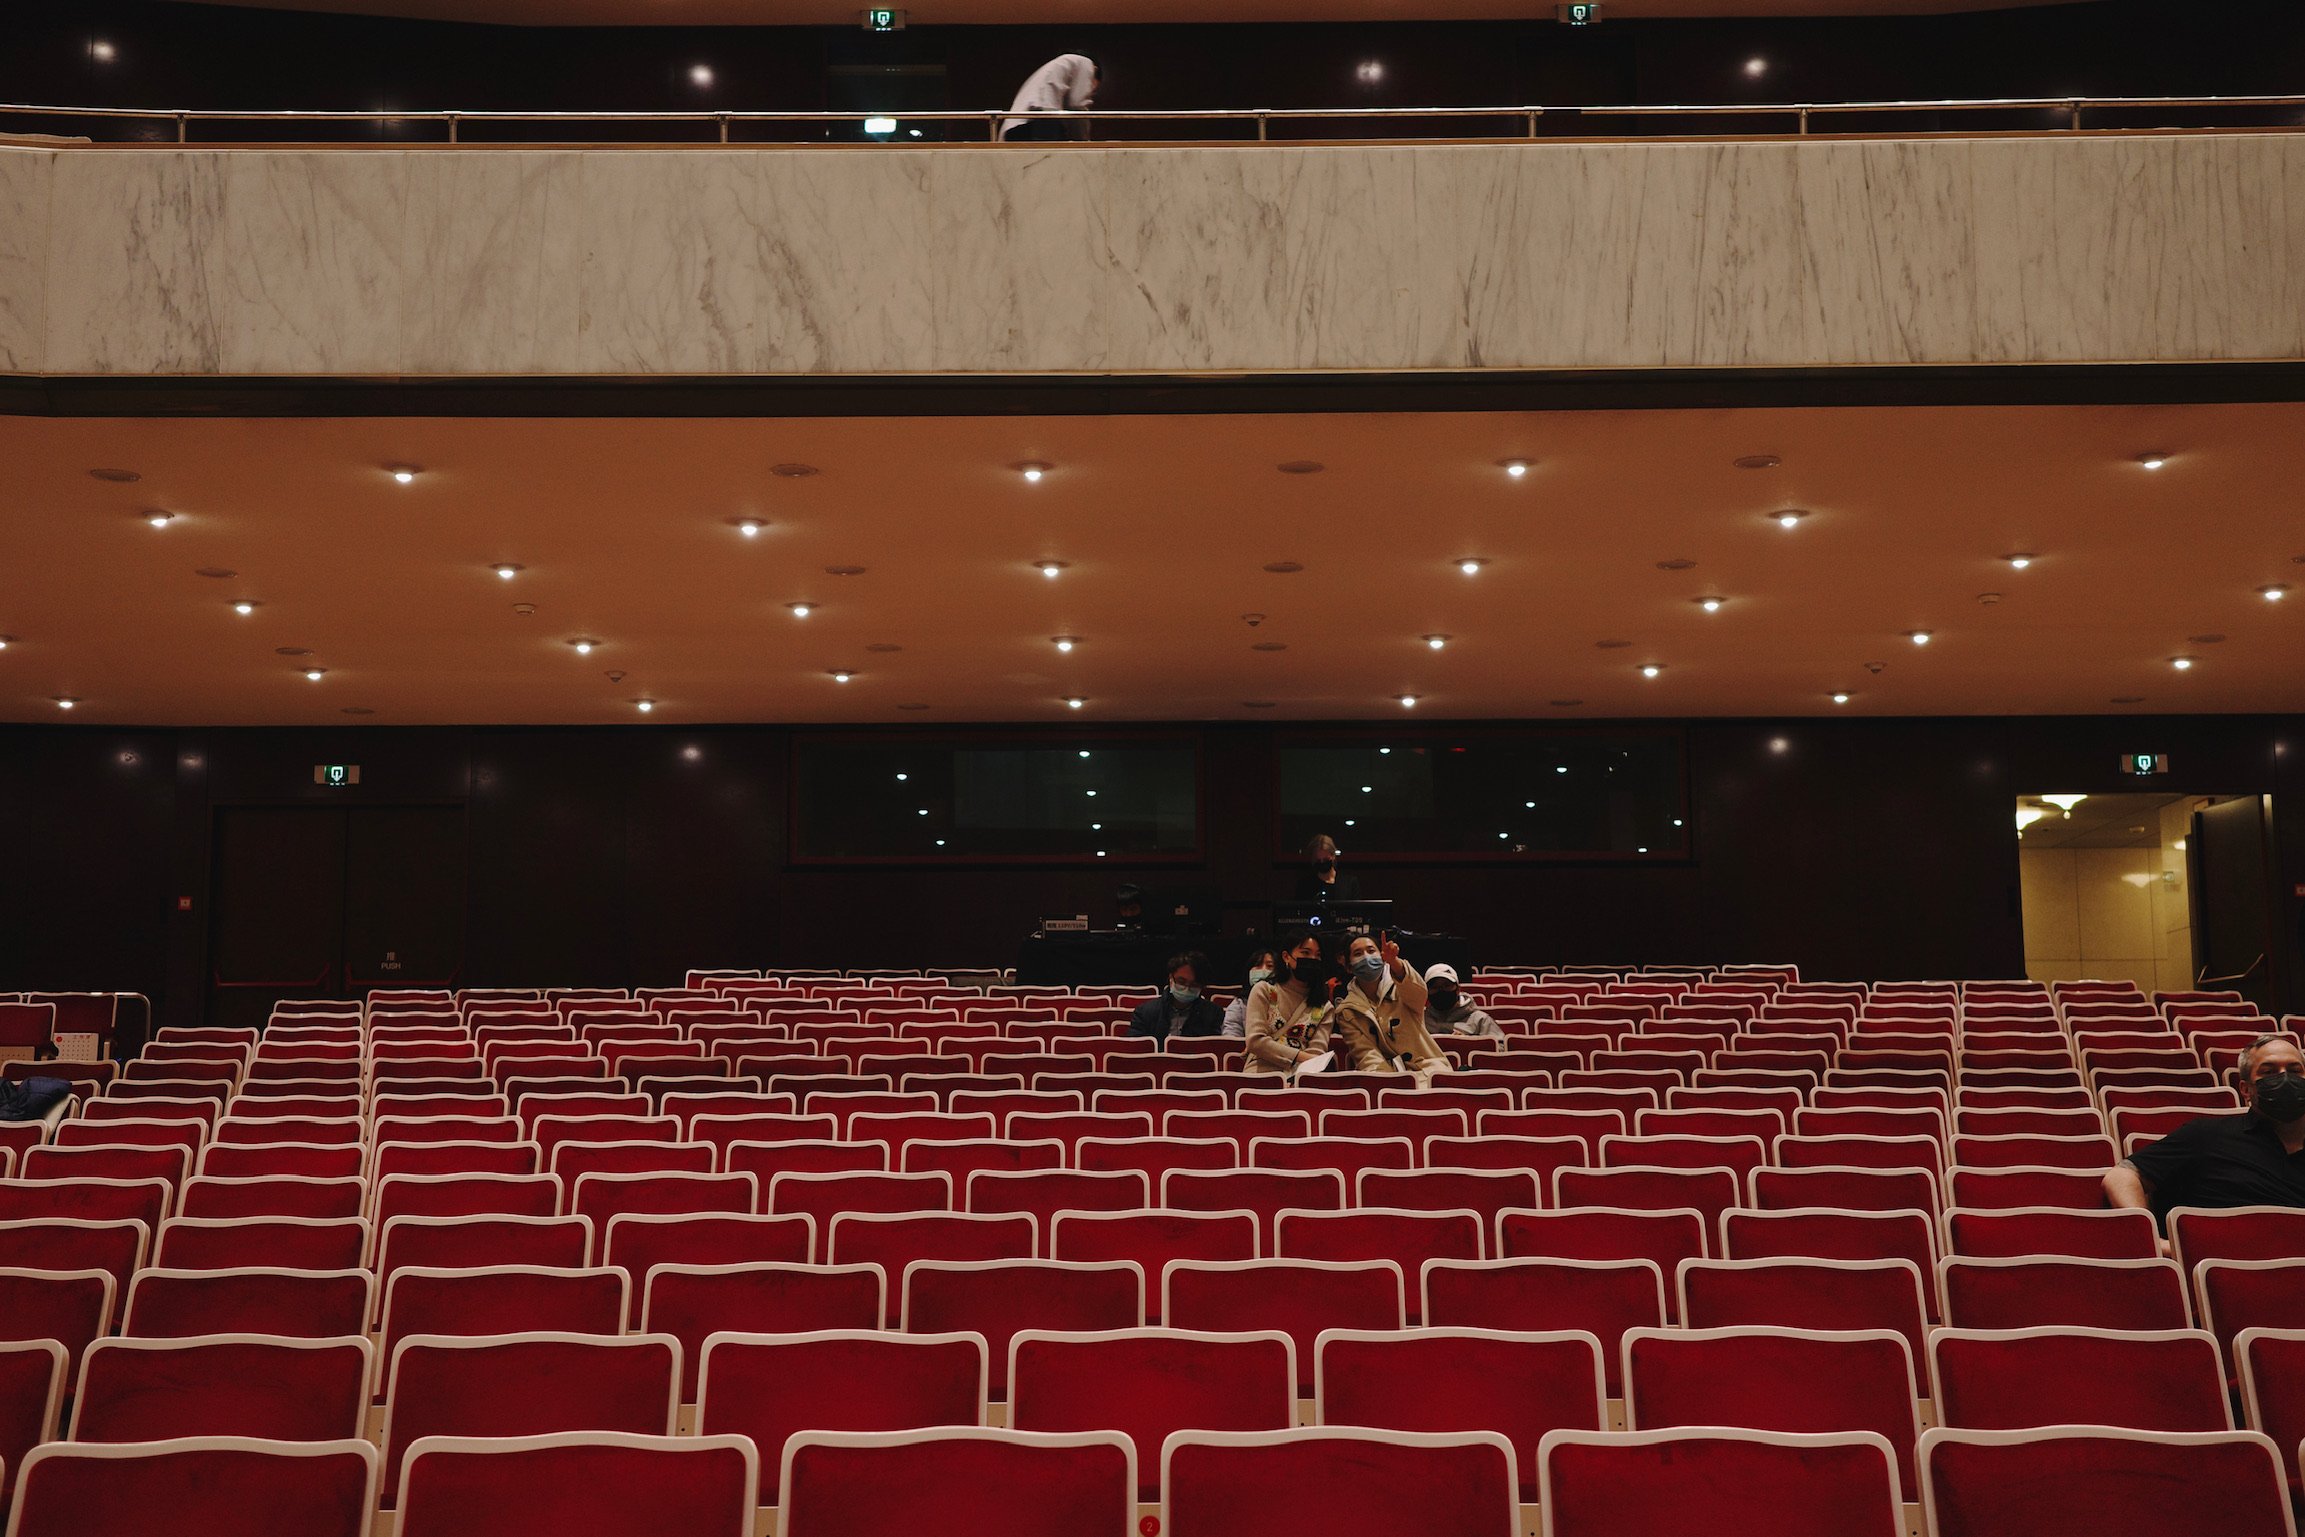 Red velvet seats and balconies in a concert hall. At the back, the PA station can be seen.